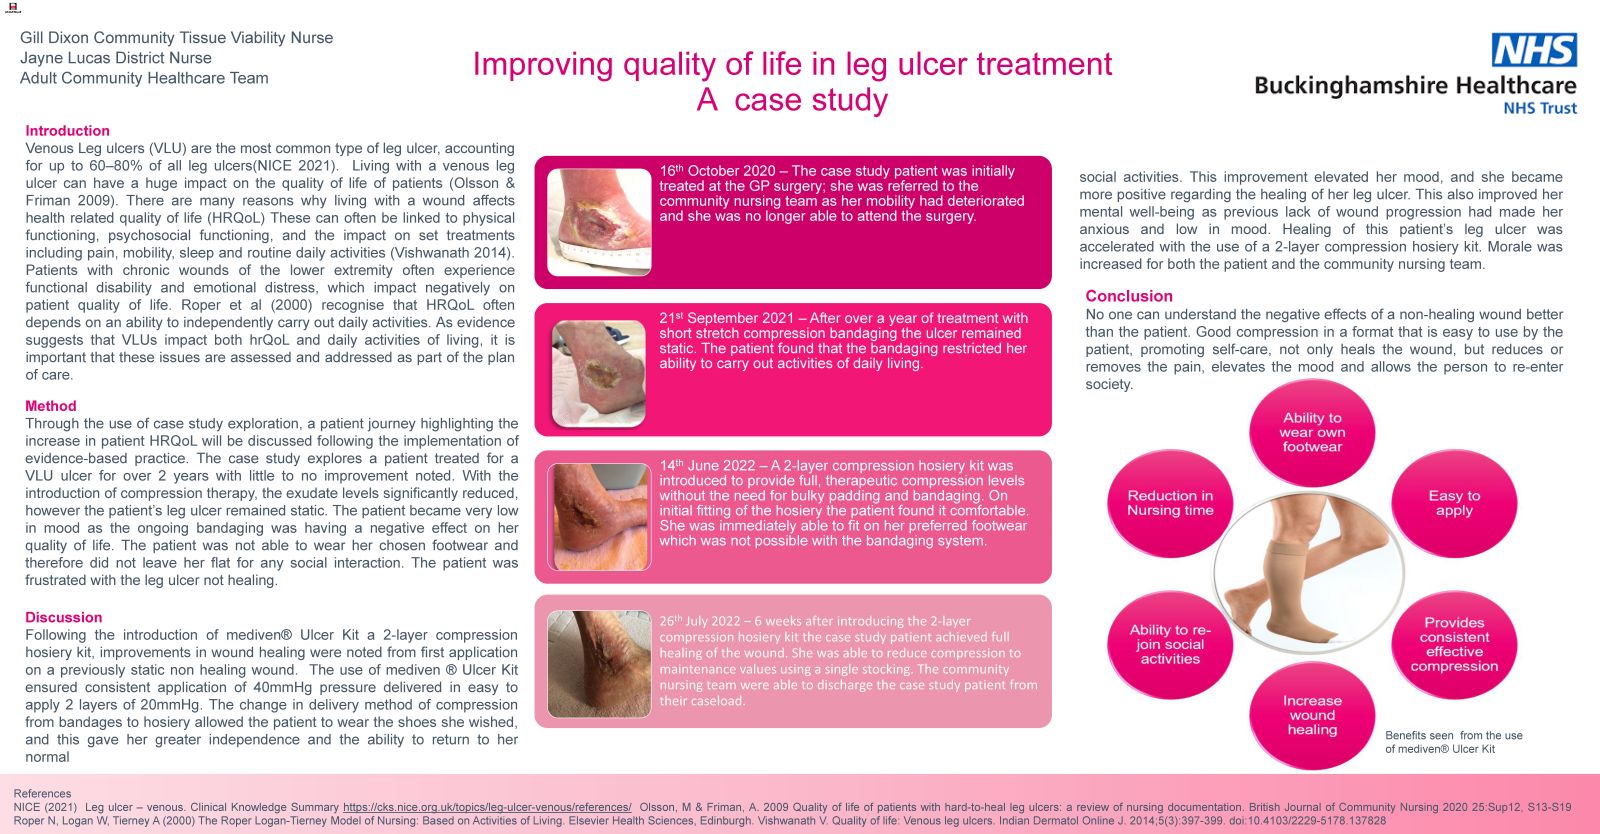 Improving quality of life in leg ulcer treatment A case study